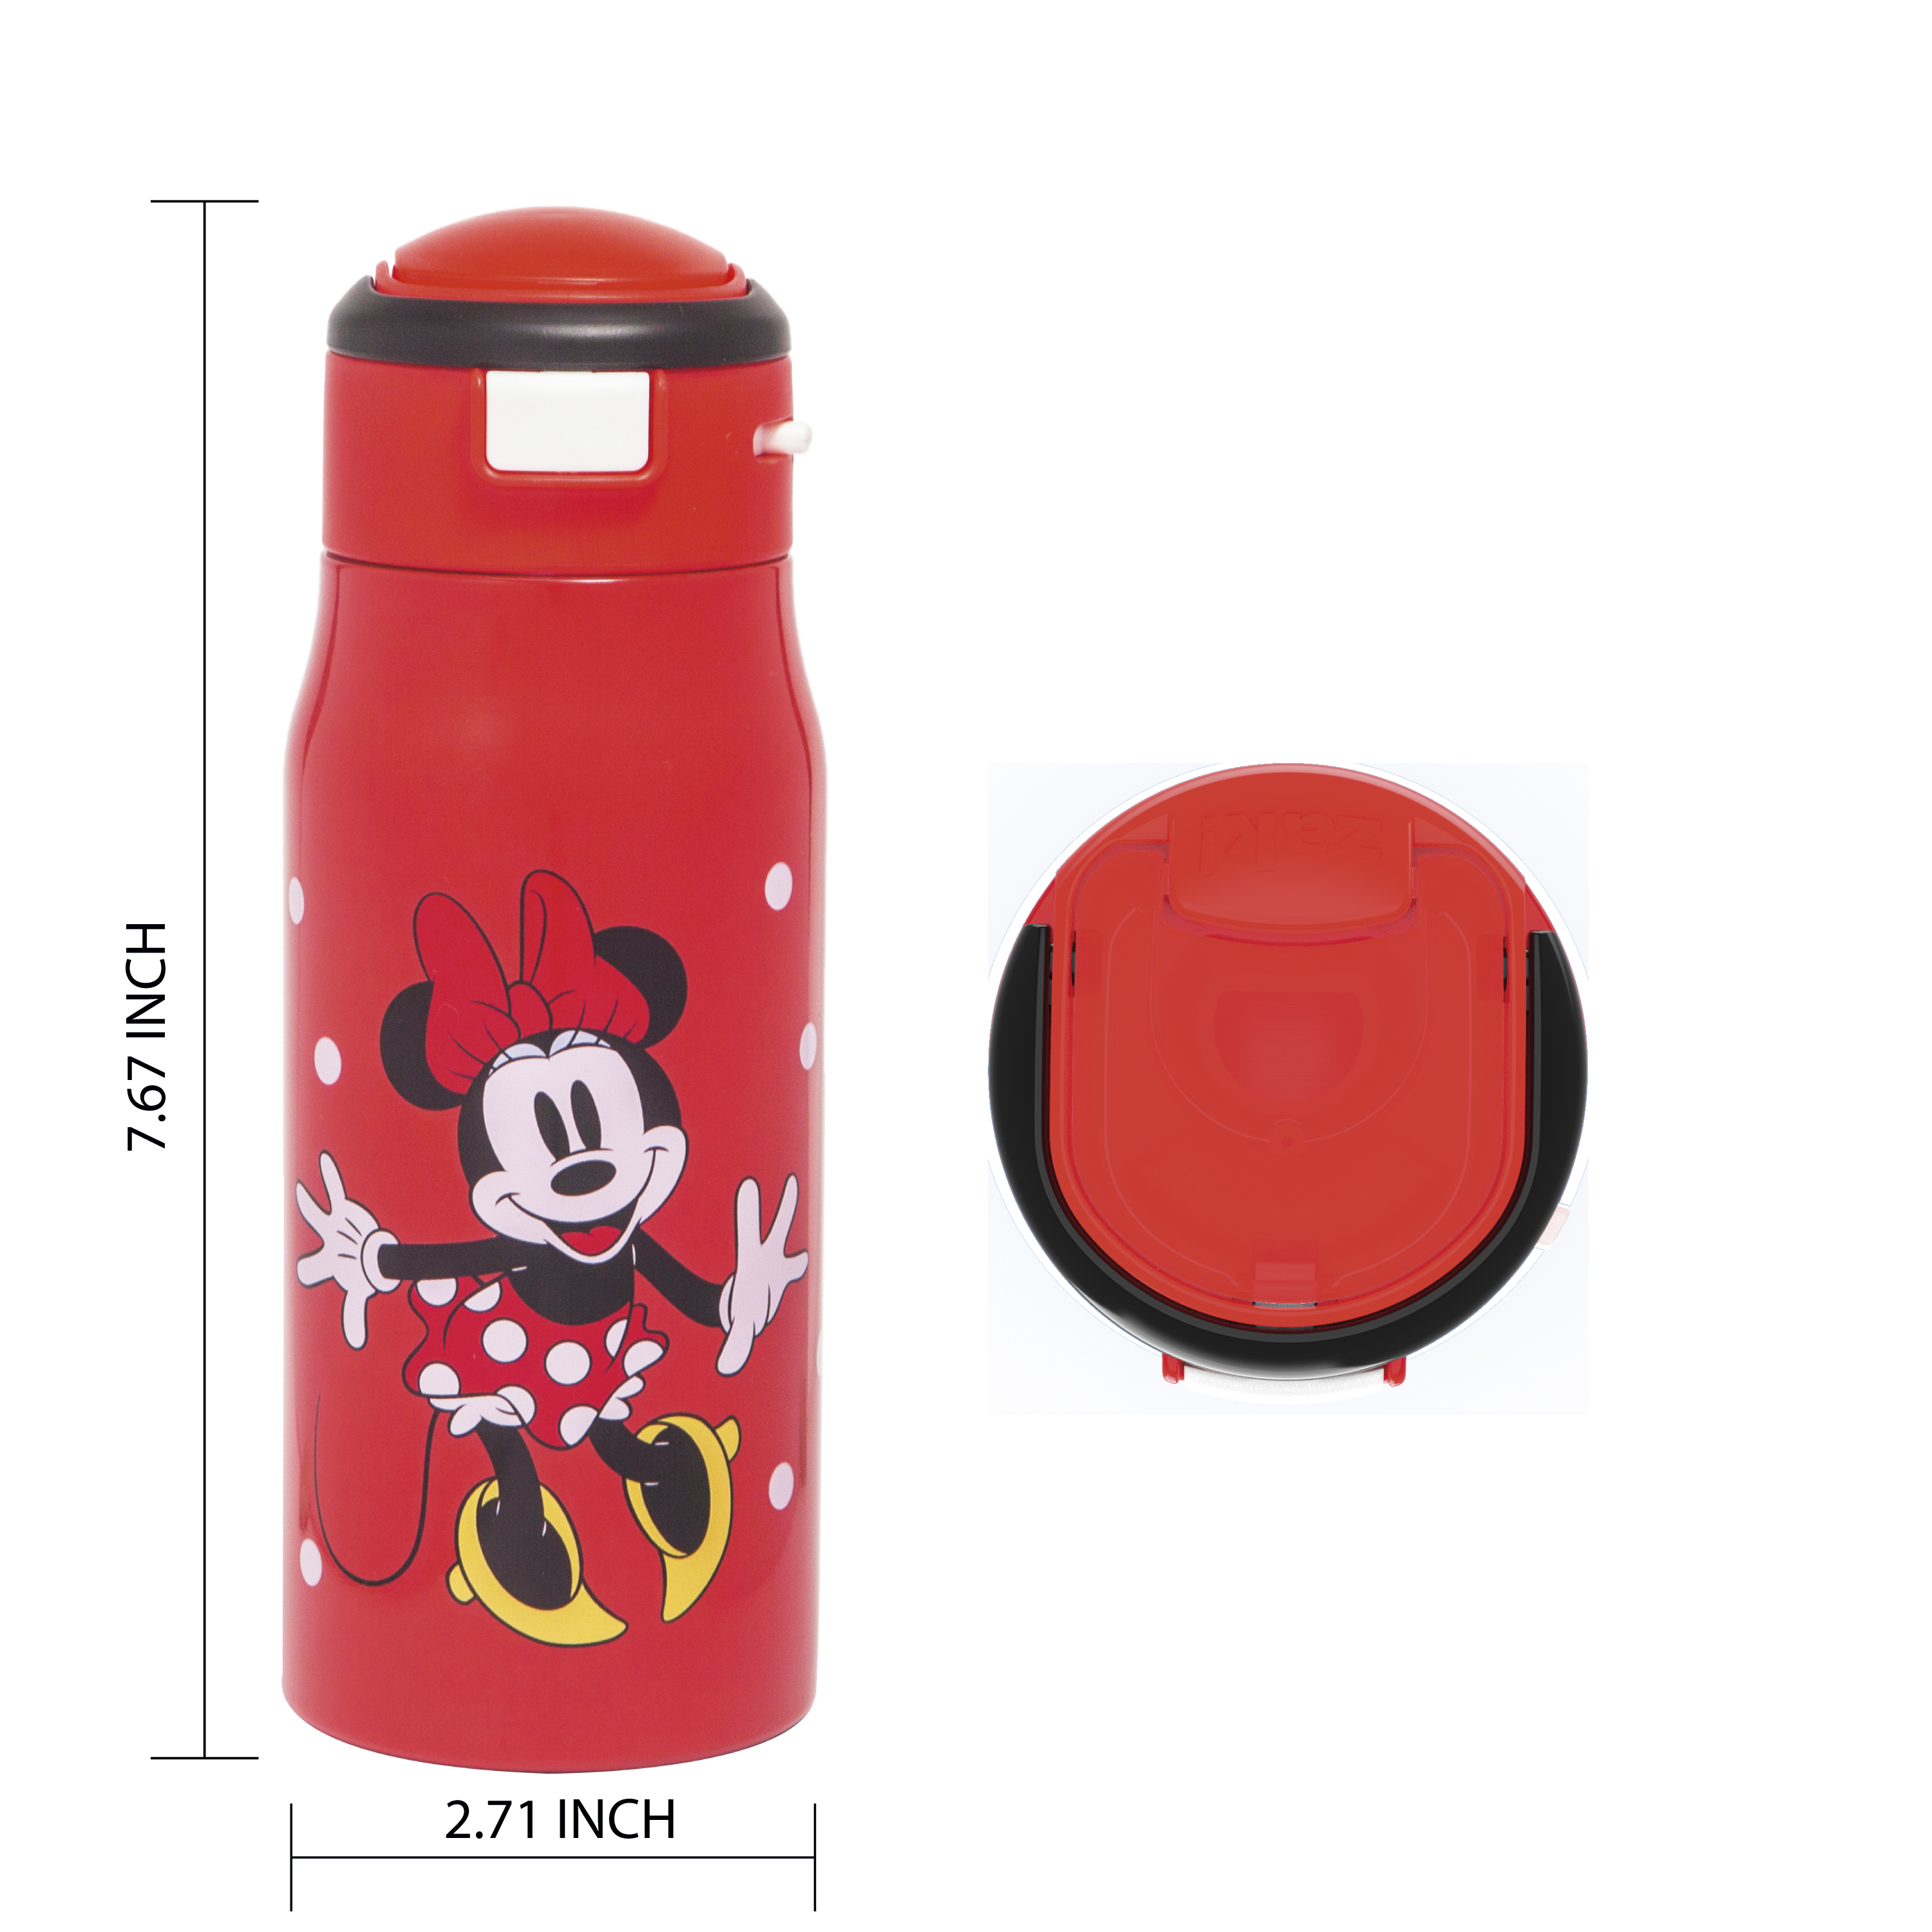 Disney 13.5 ounce Mesa Double Wall Insulated Stainless Steel Water Bottle, Minnie Mouse slideshow image 9